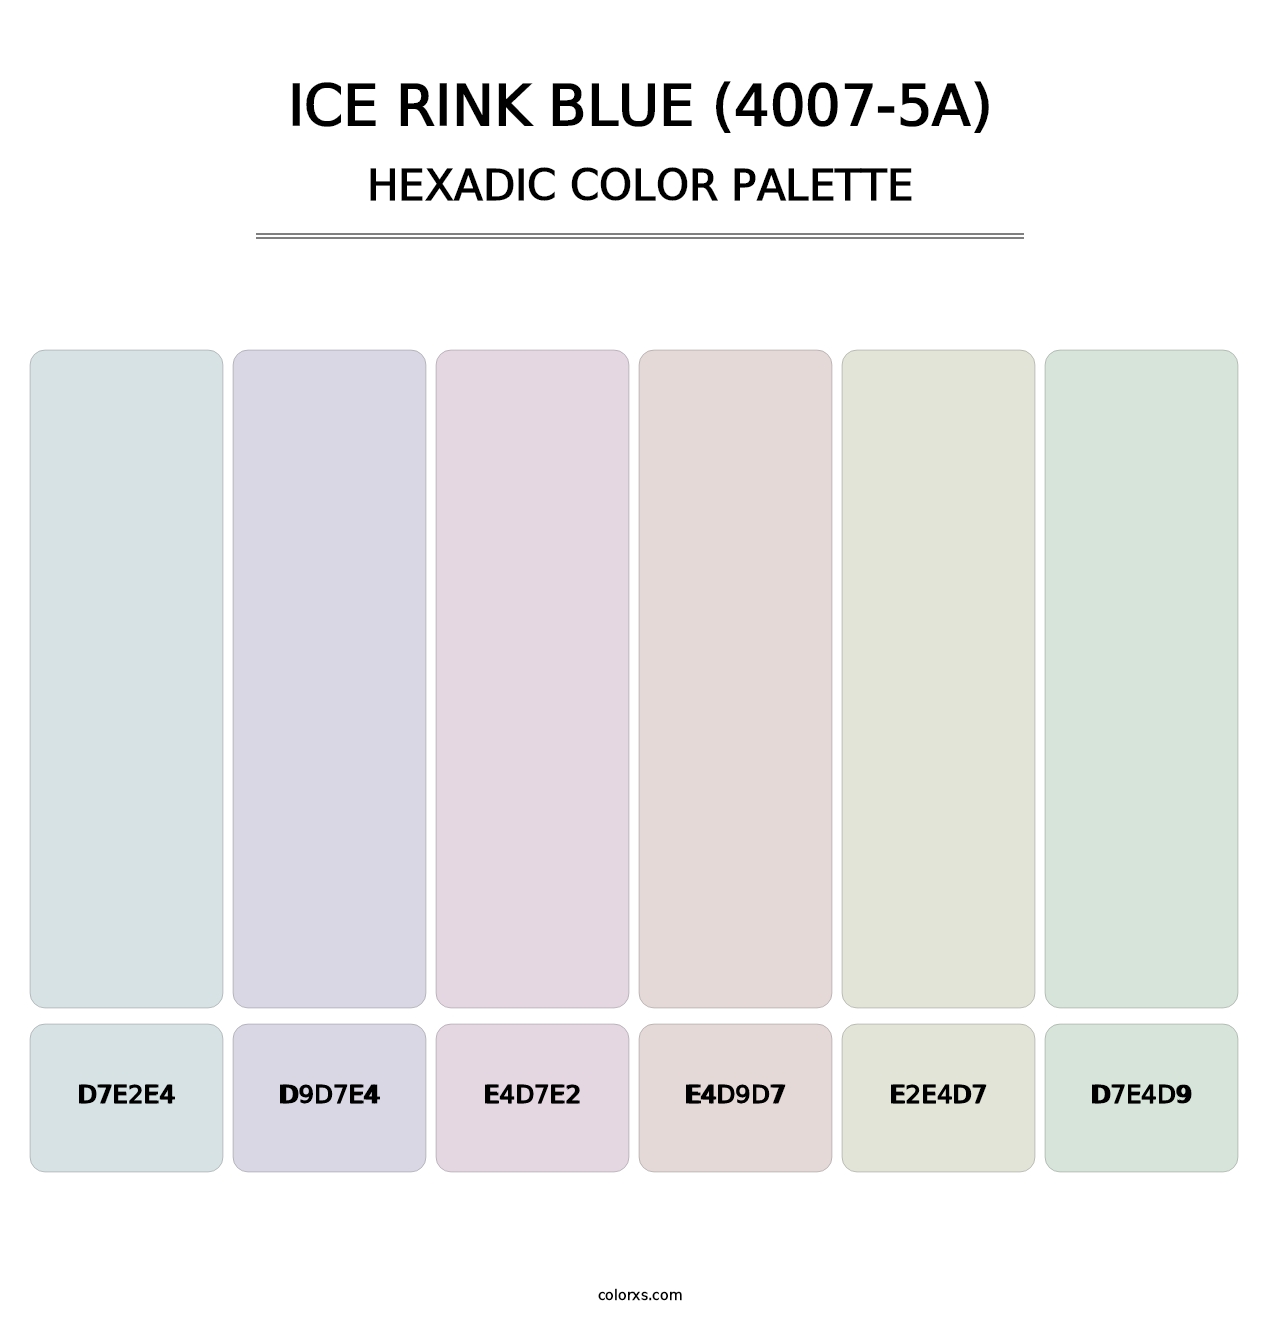 Ice Rink Blue (4007-5A) - Hexadic Color Palette